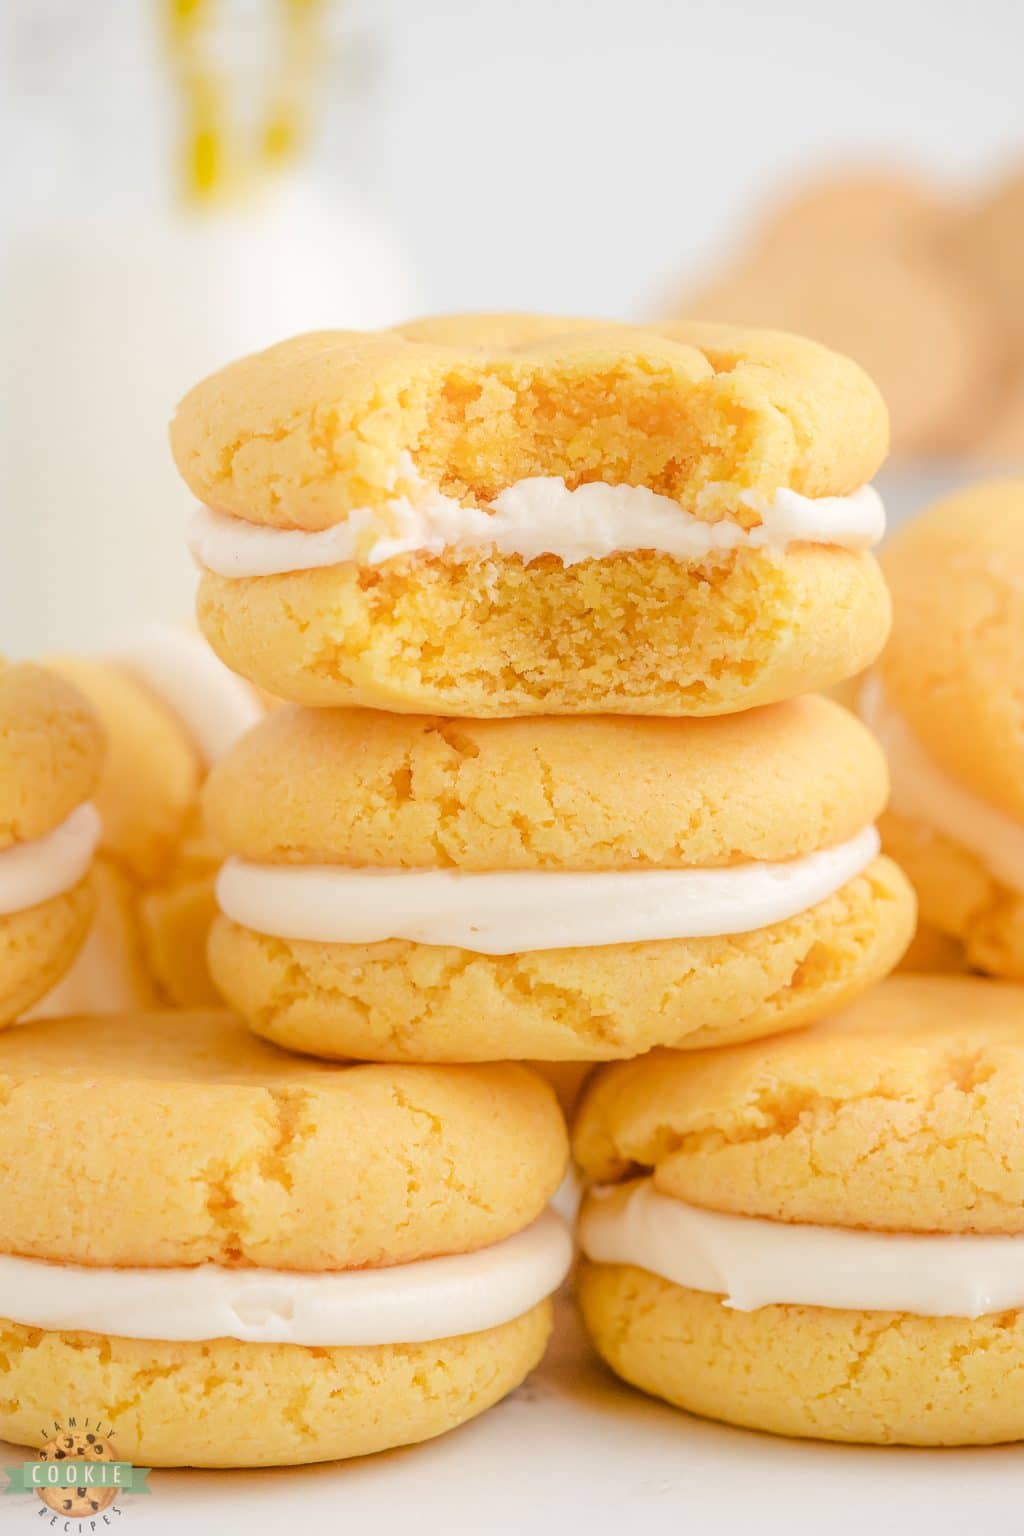 HOMEMADE GOLDEN OREO COOKIES - Family Cookie Recipes